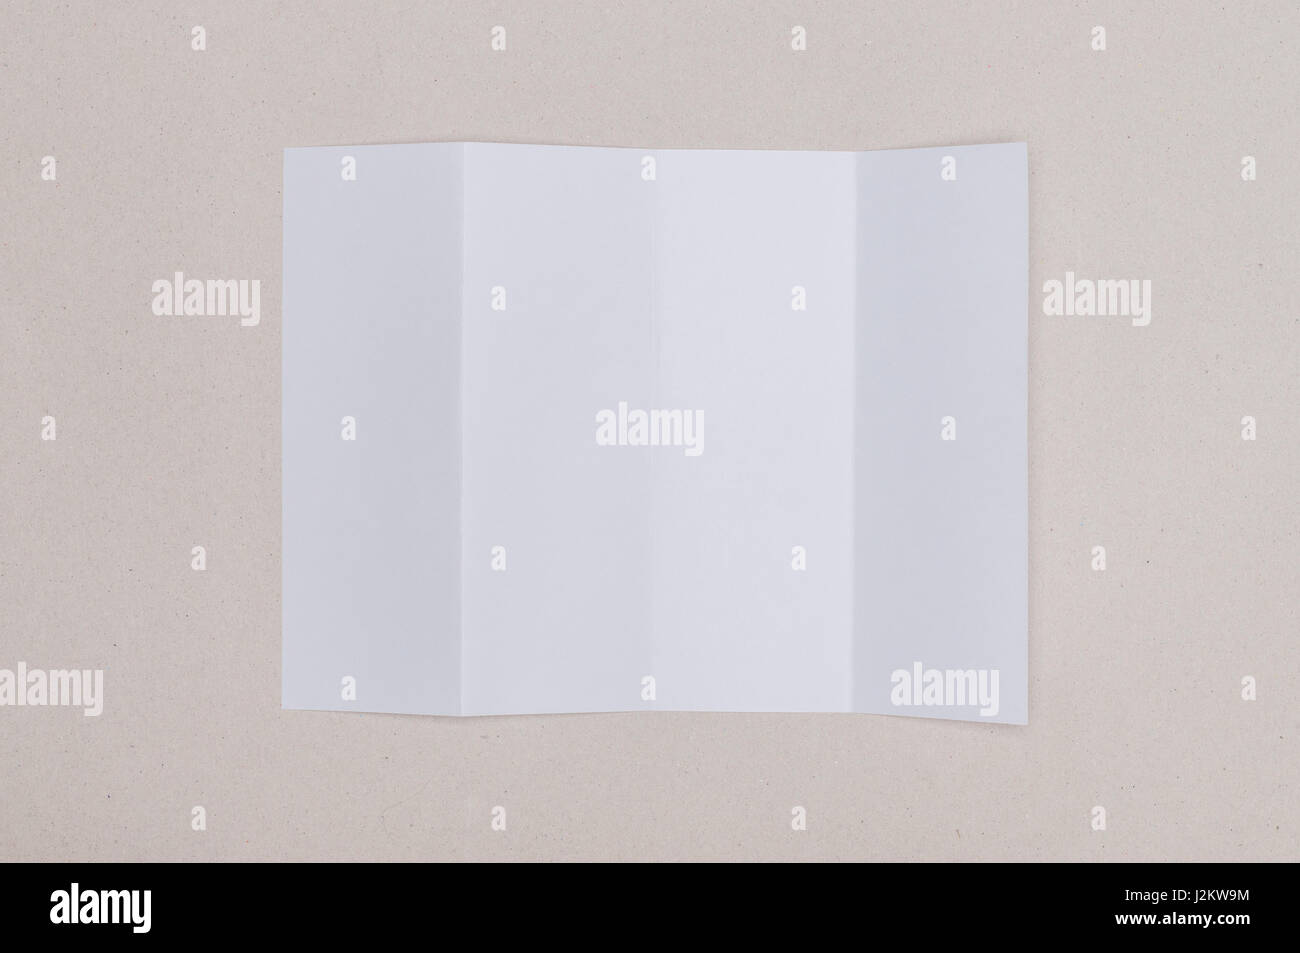 Tri Fold Card High Resolution Stock Photography and Images - Alamy With Three Fold Card Template